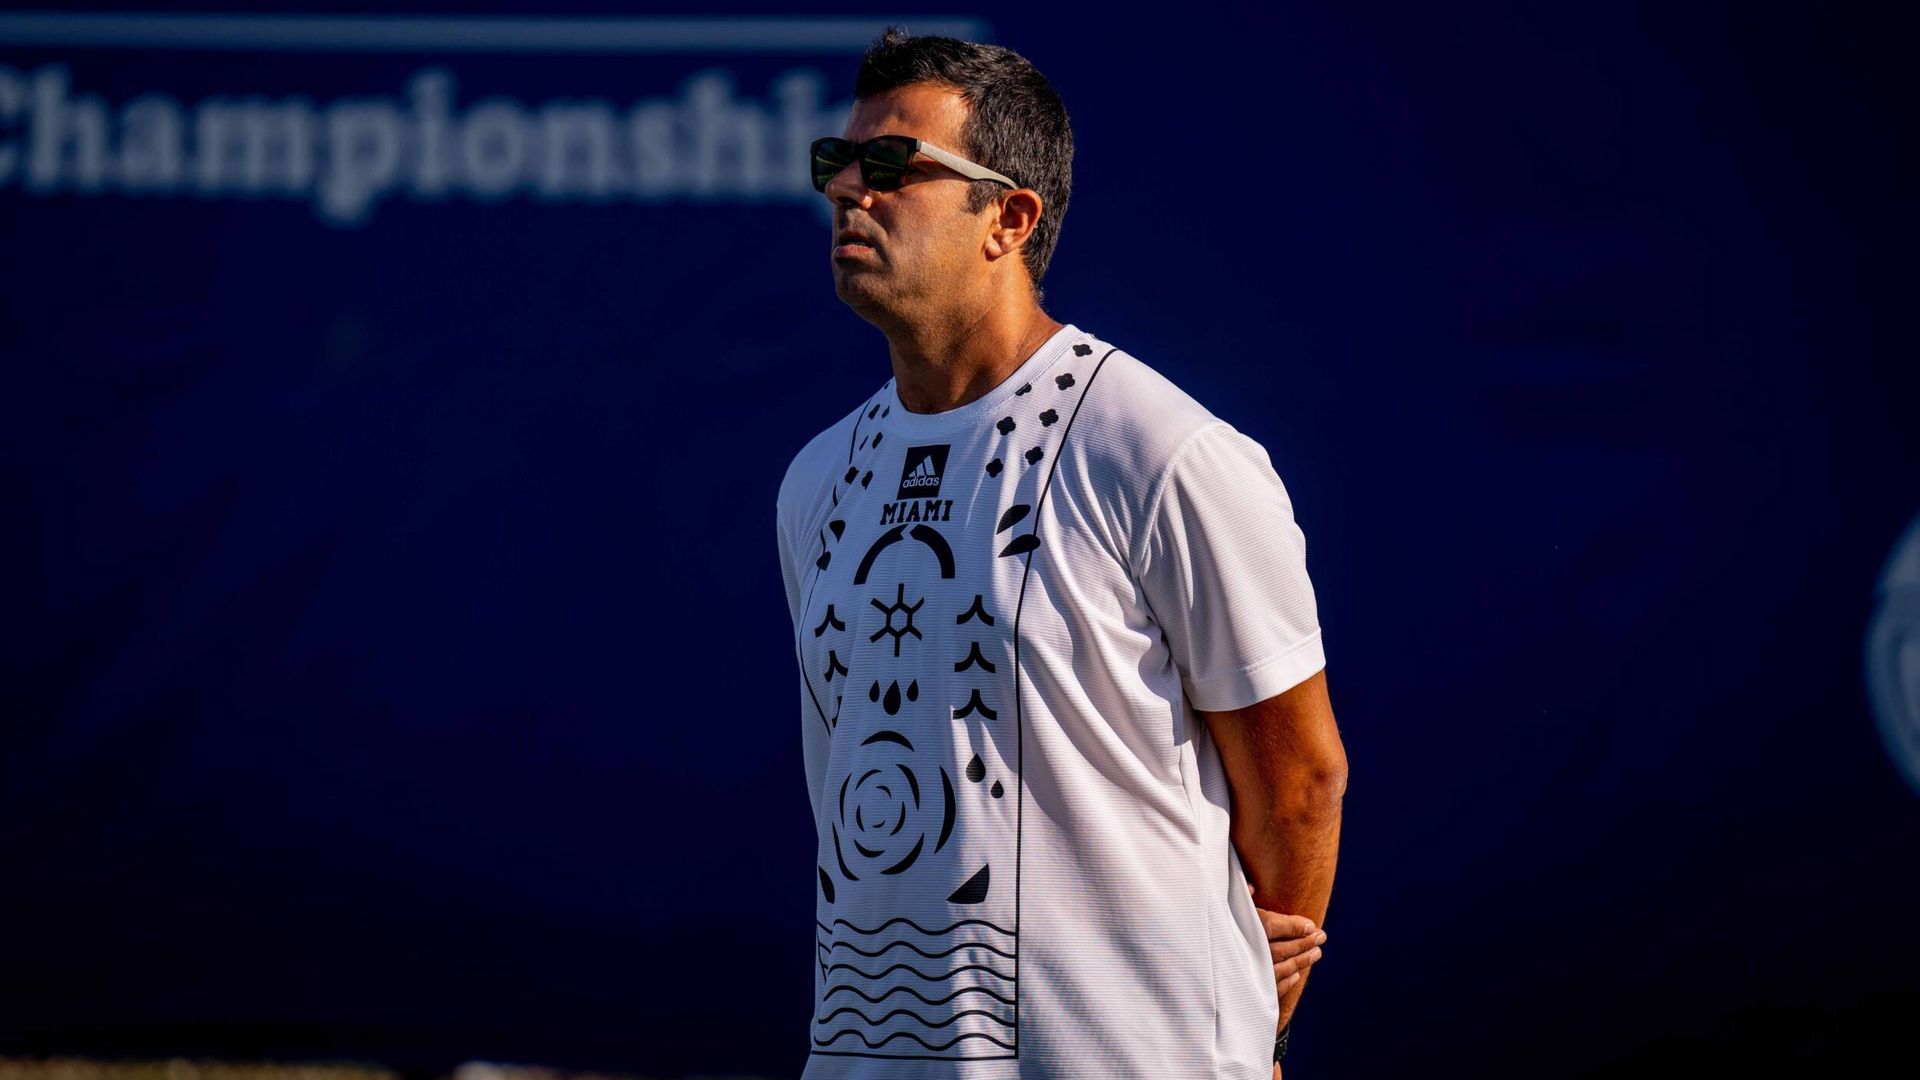 Santos Repeats as ITA Regional Assistant Coach of the Year